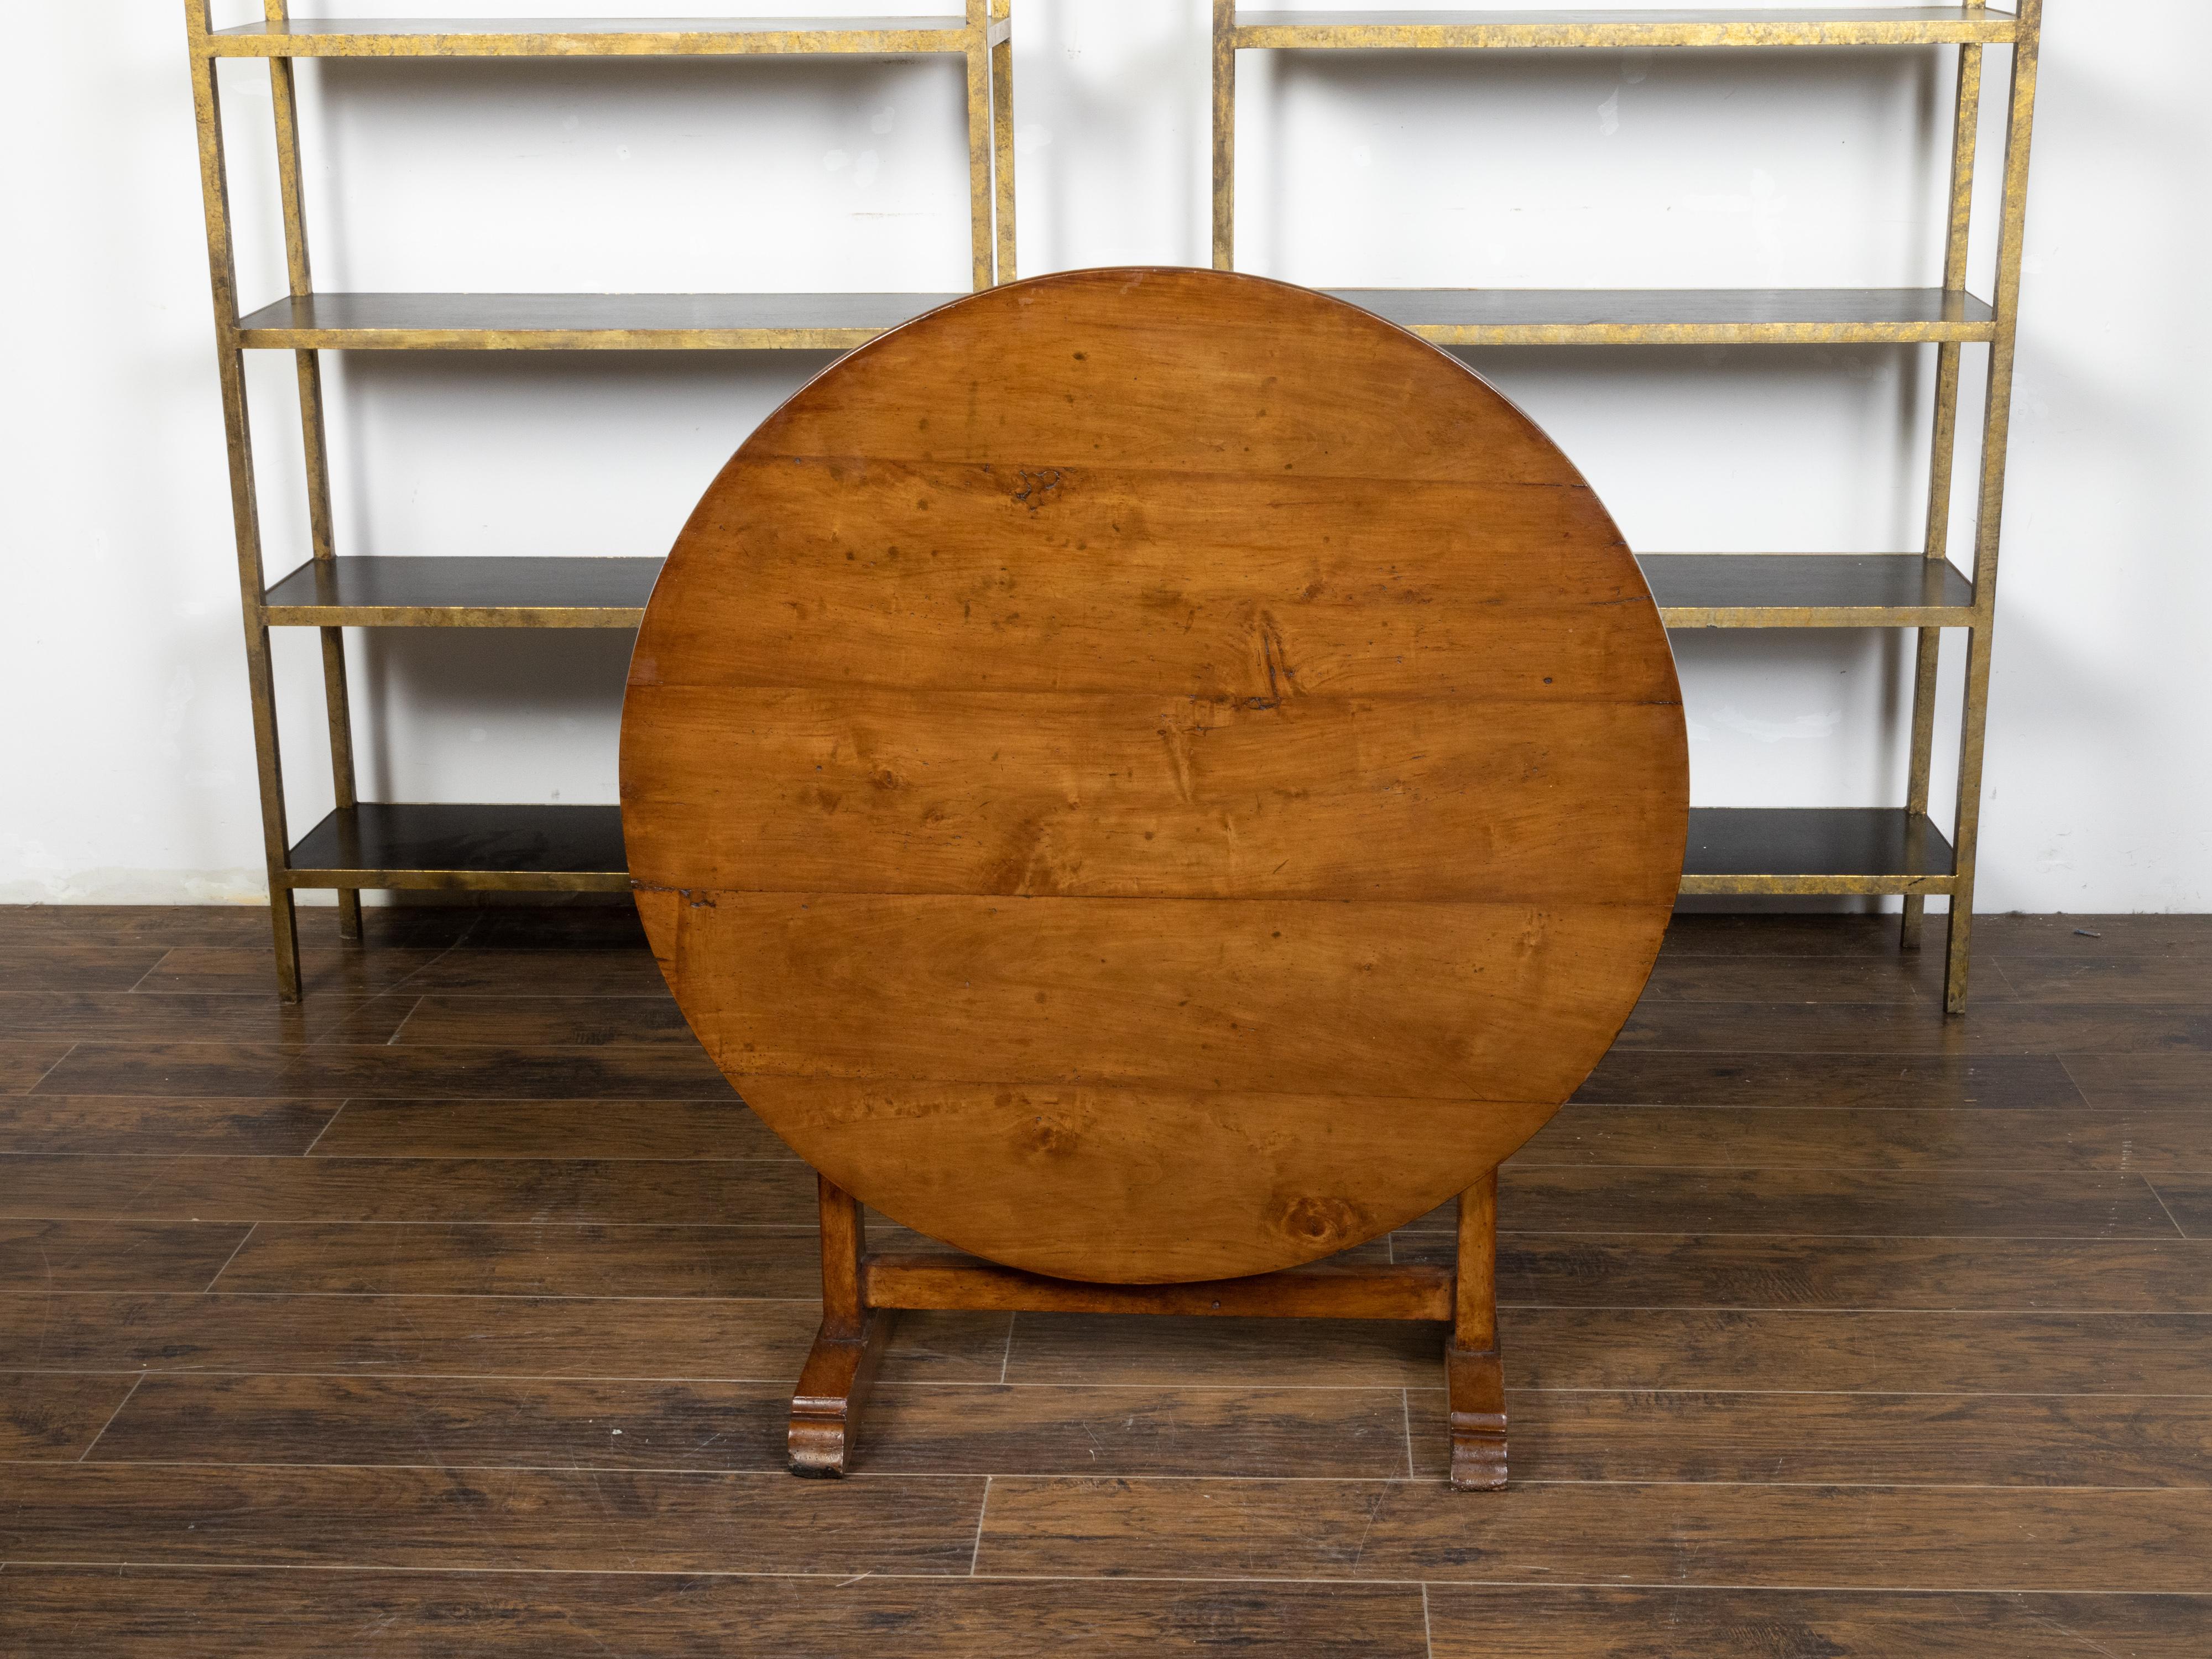 A French walnut wine tasting table from the 19th century, with circular top, trestle base and turning butterfly wedge. Created in France during the politically dynamic 19th century, this rustic walnut wine tasting table features a round planked